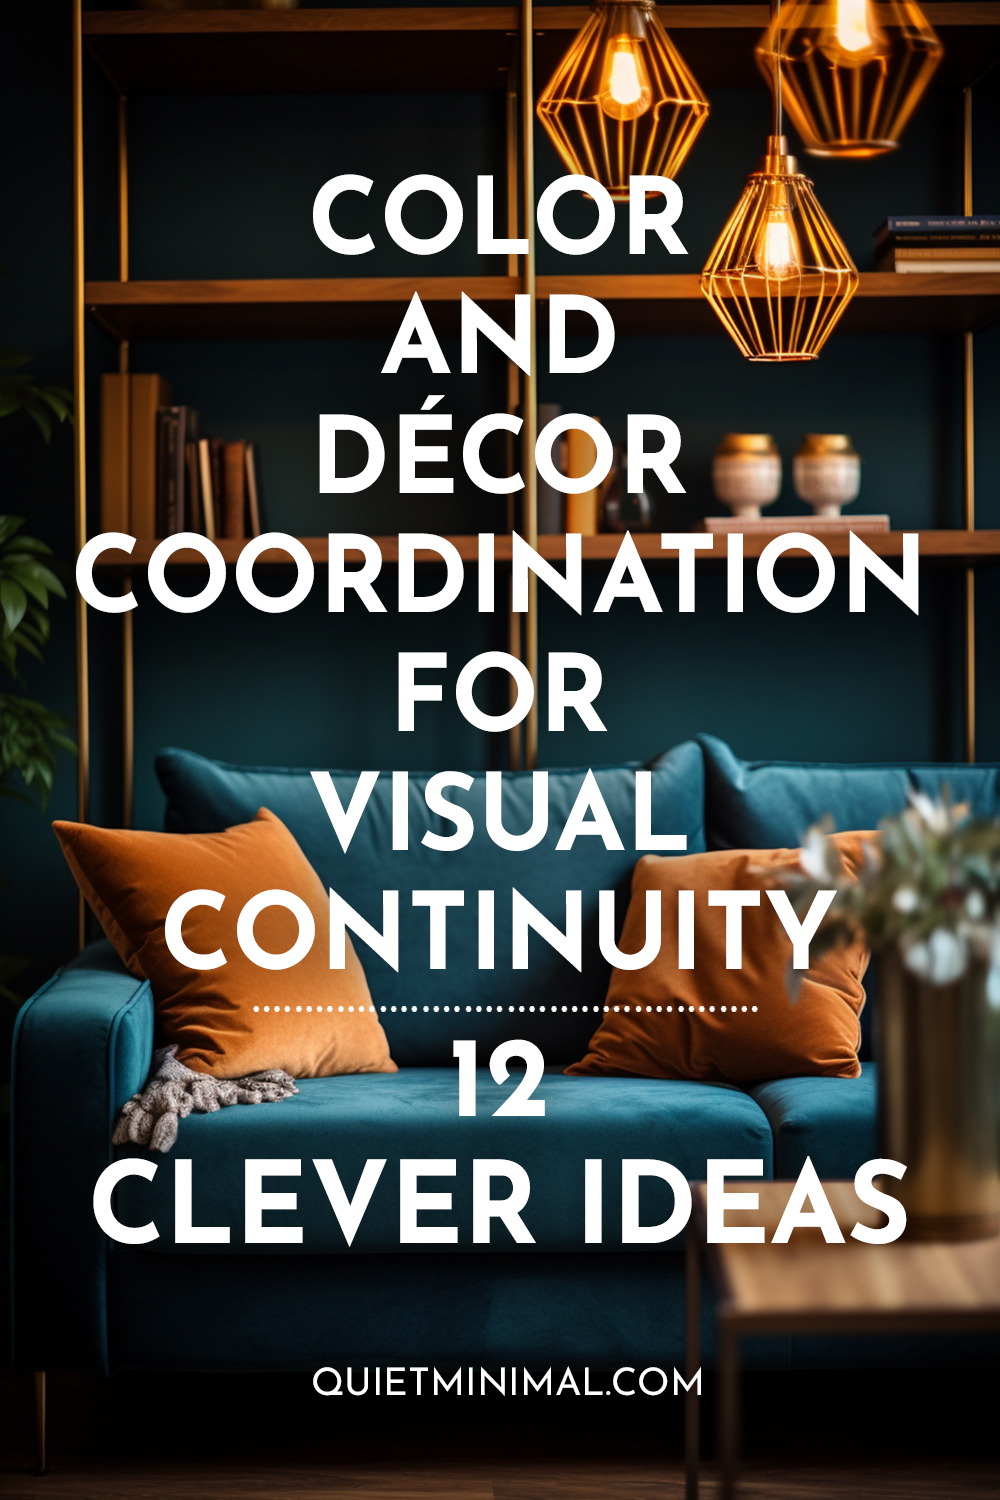 Explore 12 clever ideas for achieving visual continuity and décor coordination through color.